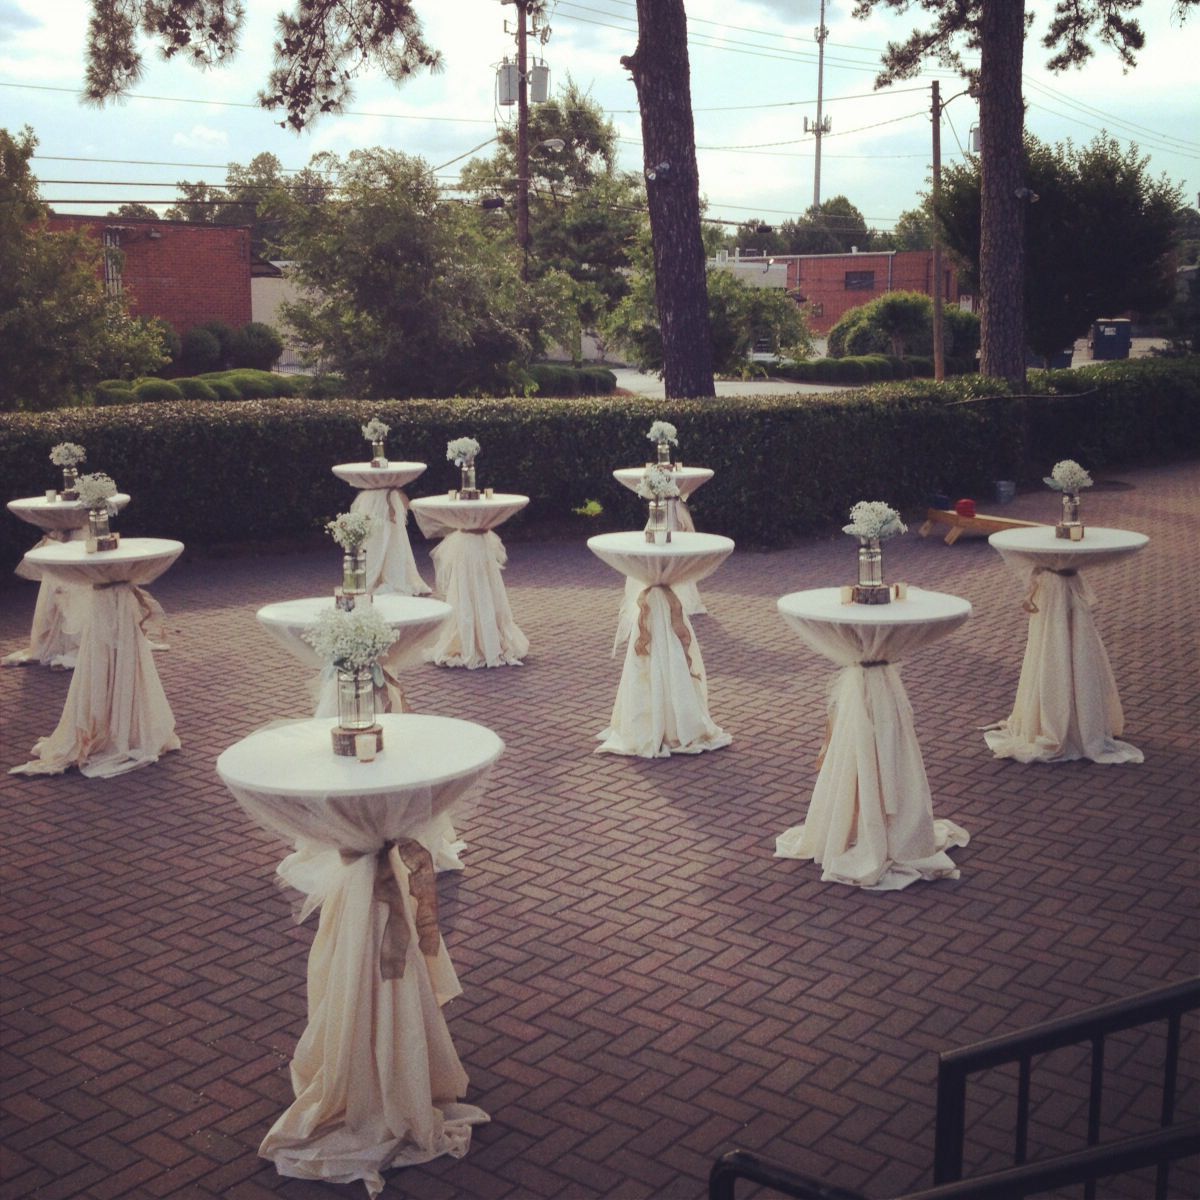 Outdoor Cocktail Tables With Tulle Overlays, Burlap Ties And Baby's Regarding Natural Outdoor Cocktail Tables (View 15 of 20)